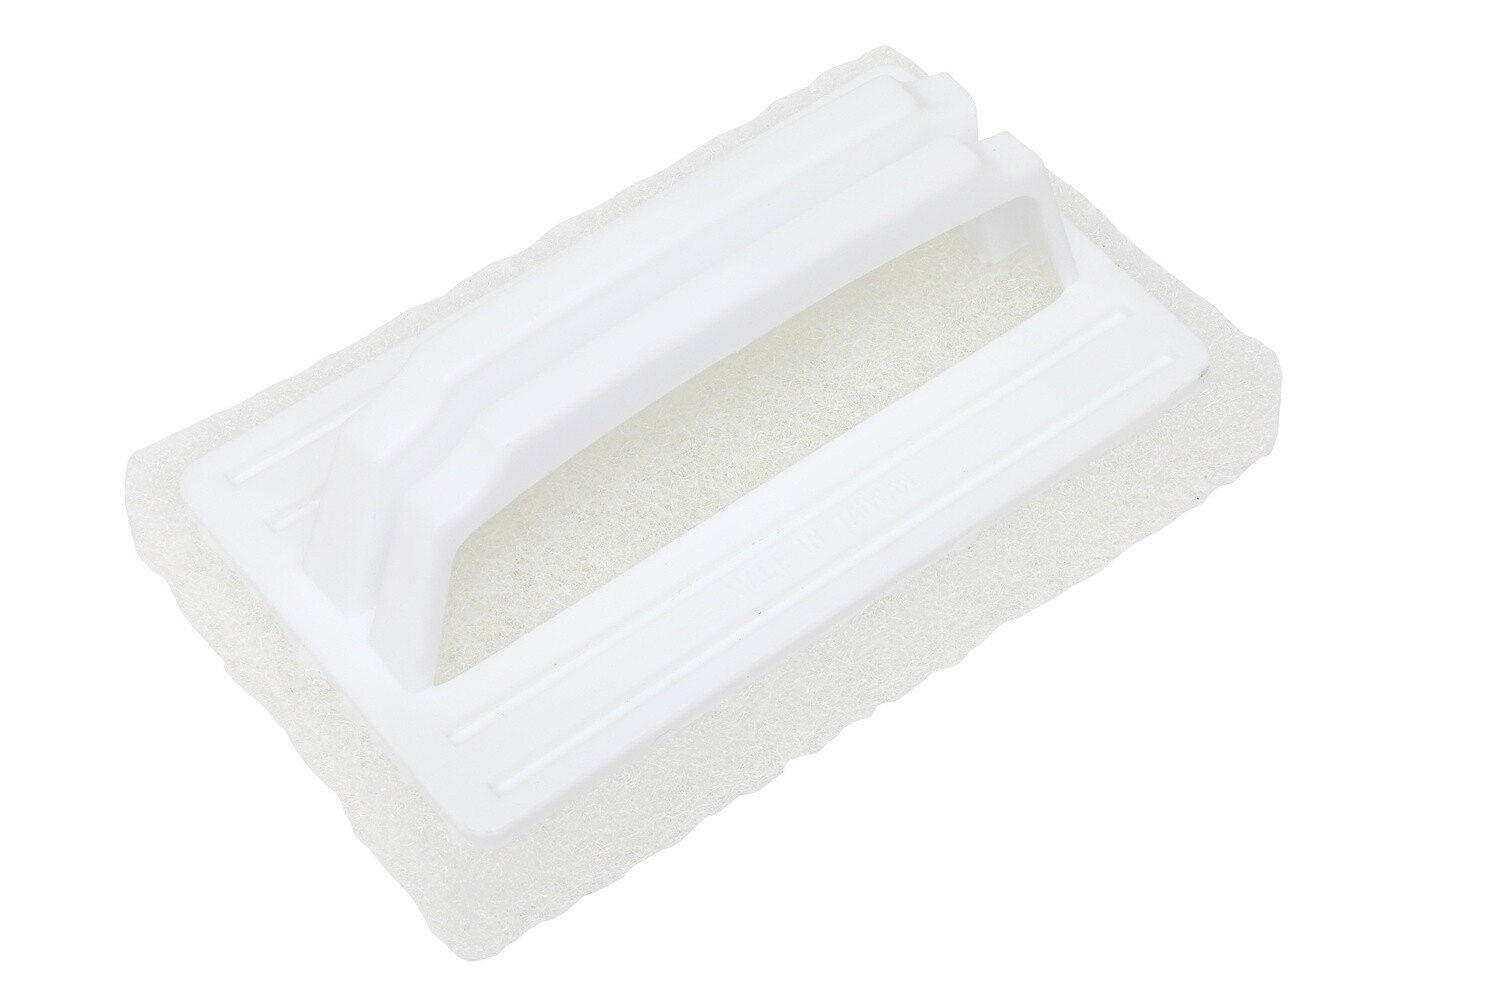 Scourer Pad Handheld Bathroom and Pool Scrubber | E